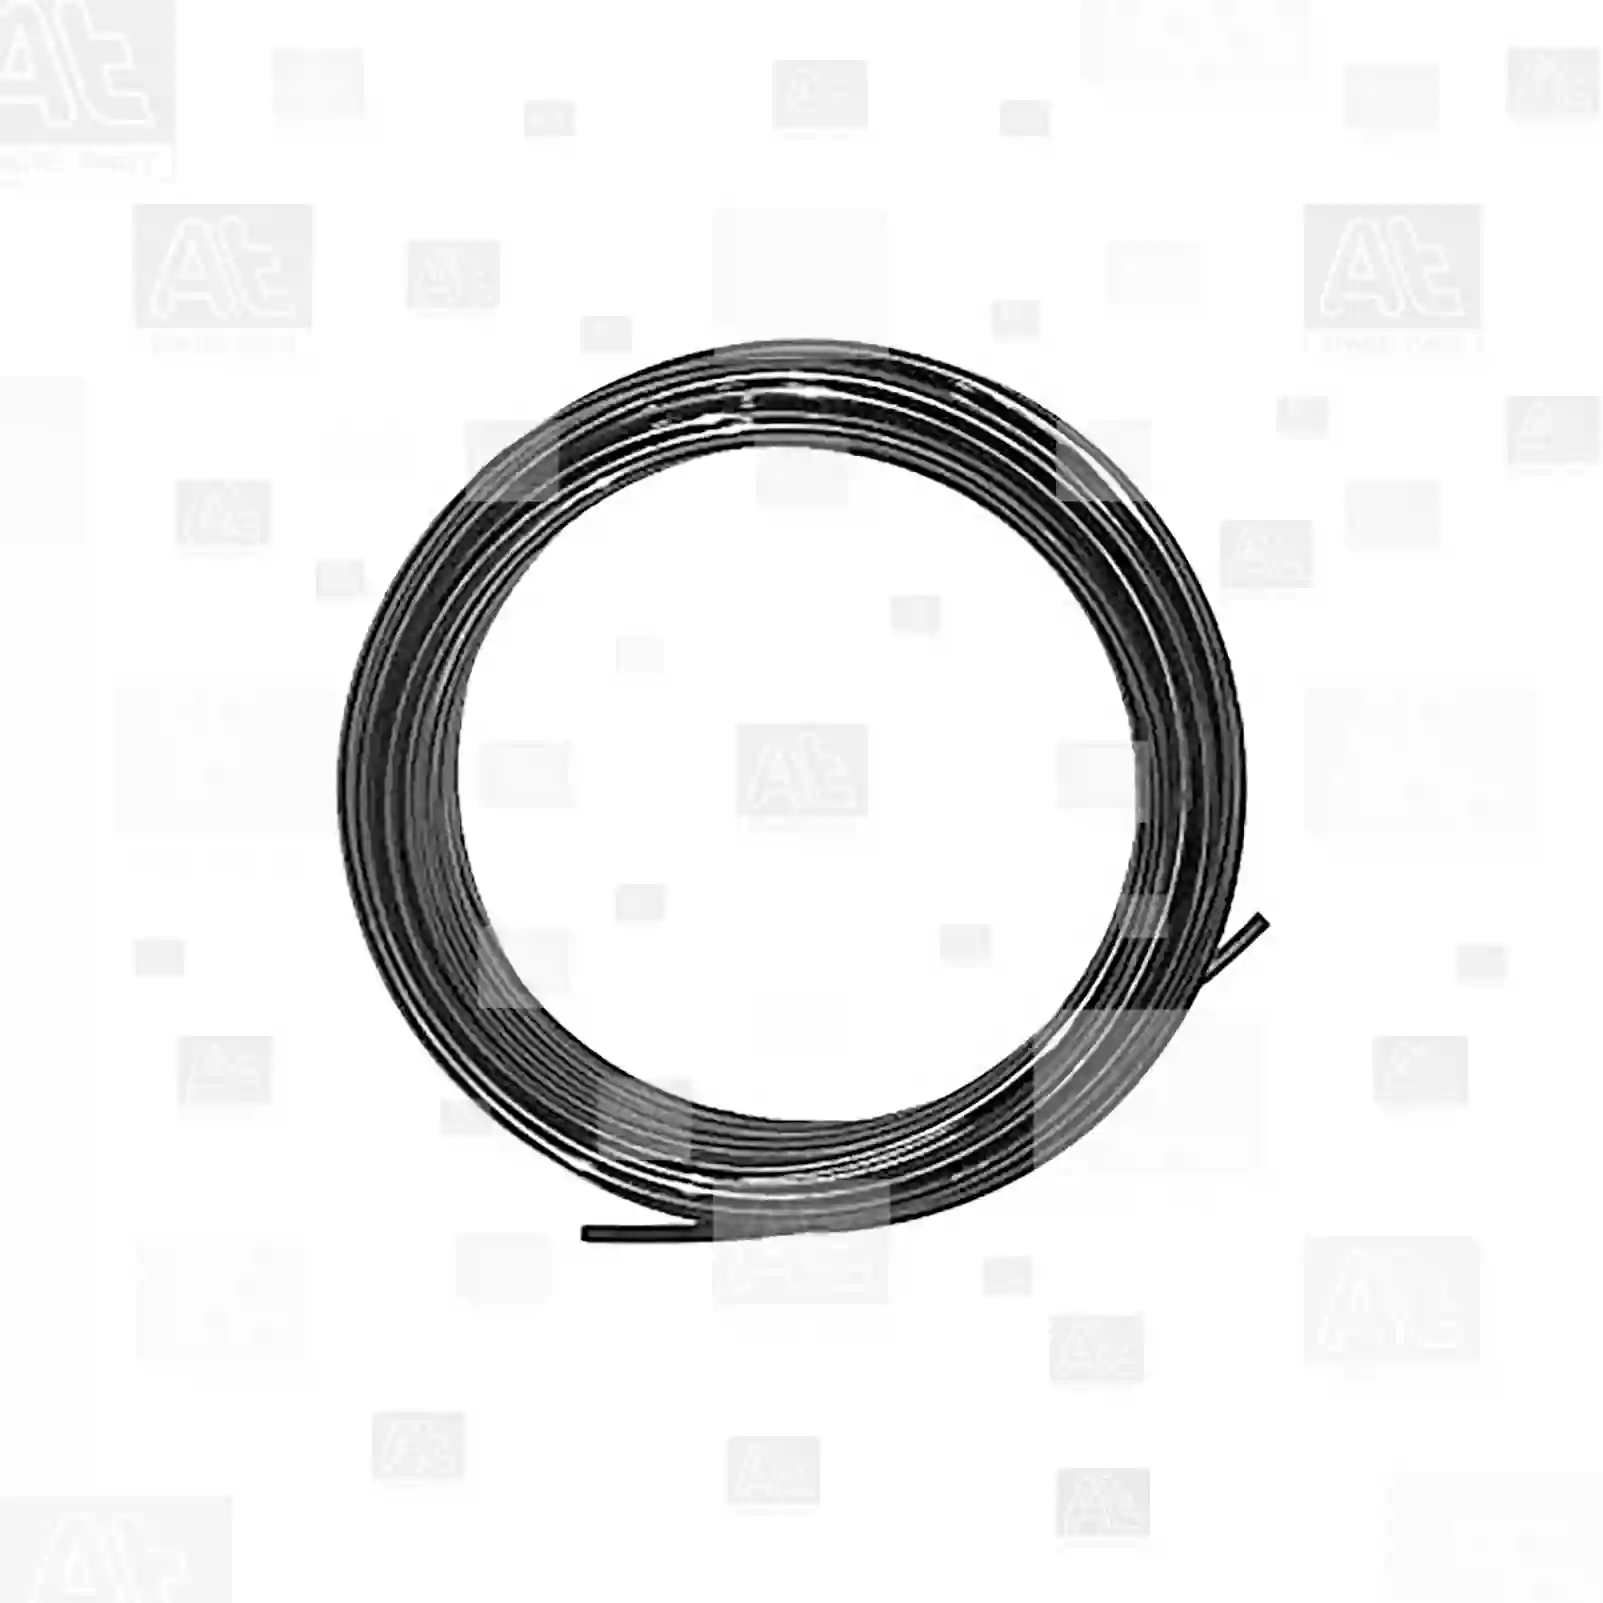 Nylon pipe, black, 77725372, 0053102701, 5125957AA, 5133891AA, K05125957AA, 0799033, 0959033, 1399869, 1519680, 1917760, 799033, 959033, 04823129, 4823129, 98489309, 04351609008, 04351609207, 04351609708, 0009872727, 0009979082, 0089979082, 0109970182, 0109976982, 6360780925, 8282519166, 9014760101, 9014760201, 7400980832, 4309600300, 1483544, 1935151, 2443493, 2660376, 814805, 977745, 980832, ZG50531-0008 ||  77725372 At Spare Part | Engine, Accelerator Pedal, Camshaft, Connecting Rod, Crankcase, Crankshaft, Cylinder Head, Engine Suspension Mountings, Exhaust Manifold, Exhaust Gas Recirculation, Filter Kits, Flywheel Housing, General Overhaul Kits, Engine, Intake Manifold, Oil Cleaner, Oil Cooler, Oil Filter, Oil Pump, Oil Sump, Piston & Liner, Sensor & Switch, Timing Case, Turbocharger, Cooling System, Belt Tensioner, Coolant Filter, Coolant Pipe, Corrosion Prevention Agent, Drive, Expansion Tank, Fan, Intercooler, Monitors & Gauges, Radiator, Thermostat, V-Belt / Timing belt, Water Pump, Fuel System, Electronical Injector Unit, Feed Pump, Fuel Filter, cpl., Fuel Gauge Sender,  Fuel Line, Fuel Pump, Fuel Tank, Injection Line Kit, Injection Pump, Exhaust System, Clutch & Pedal, Gearbox, Propeller Shaft, Axles, Brake System, Hubs & Wheels, Suspension, Leaf Spring, Universal Parts / Accessories, Steering, Electrical System, Cabin Nylon pipe, black, 77725372, 0053102701, 5125957AA, 5133891AA, K05125957AA, 0799033, 0959033, 1399869, 1519680, 1917760, 799033, 959033, 04823129, 4823129, 98489309, 04351609008, 04351609207, 04351609708, 0009872727, 0009979082, 0089979082, 0109970182, 0109976982, 6360780925, 8282519166, 9014760101, 9014760201, 7400980832, 4309600300, 1483544, 1935151, 2443493, 2660376, 814805, 977745, 980832, ZG50531-0008 ||  77725372 At Spare Part | Engine, Accelerator Pedal, Camshaft, Connecting Rod, Crankcase, Crankshaft, Cylinder Head, Engine Suspension Mountings, Exhaust Manifold, Exhaust Gas Recirculation, Filter Kits, Flywheel Housing, General Overhaul Kits, Engine, Intake Manifold, Oil Cleaner, Oil Cooler, Oil Filter, Oil Pump, Oil Sump, Piston & Liner, Sensor & Switch, Timing Case, Turbocharger, Cooling System, Belt Tensioner, Coolant Filter, Coolant Pipe, Corrosion Prevention Agent, Drive, Expansion Tank, Fan, Intercooler, Monitors & Gauges, Radiator, Thermostat, V-Belt / Timing belt, Water Pump, Fuel System, Electronical Injector Unit, Feed Pump, Fuel Filter, cpl., Fuel Gauge Sender,  Fuel Line, Fuel Pump, Fuel Tank, Injection Line Kit, Injection Pump, Exhaust System, Clutch & Pedal, Gearbox, Propeller Shaft, Axles, Brake System, Hubs & Wheels, Suspension, Leaf Spring, Universal Parts / Accessories, Steering, Electrical System, Cabin